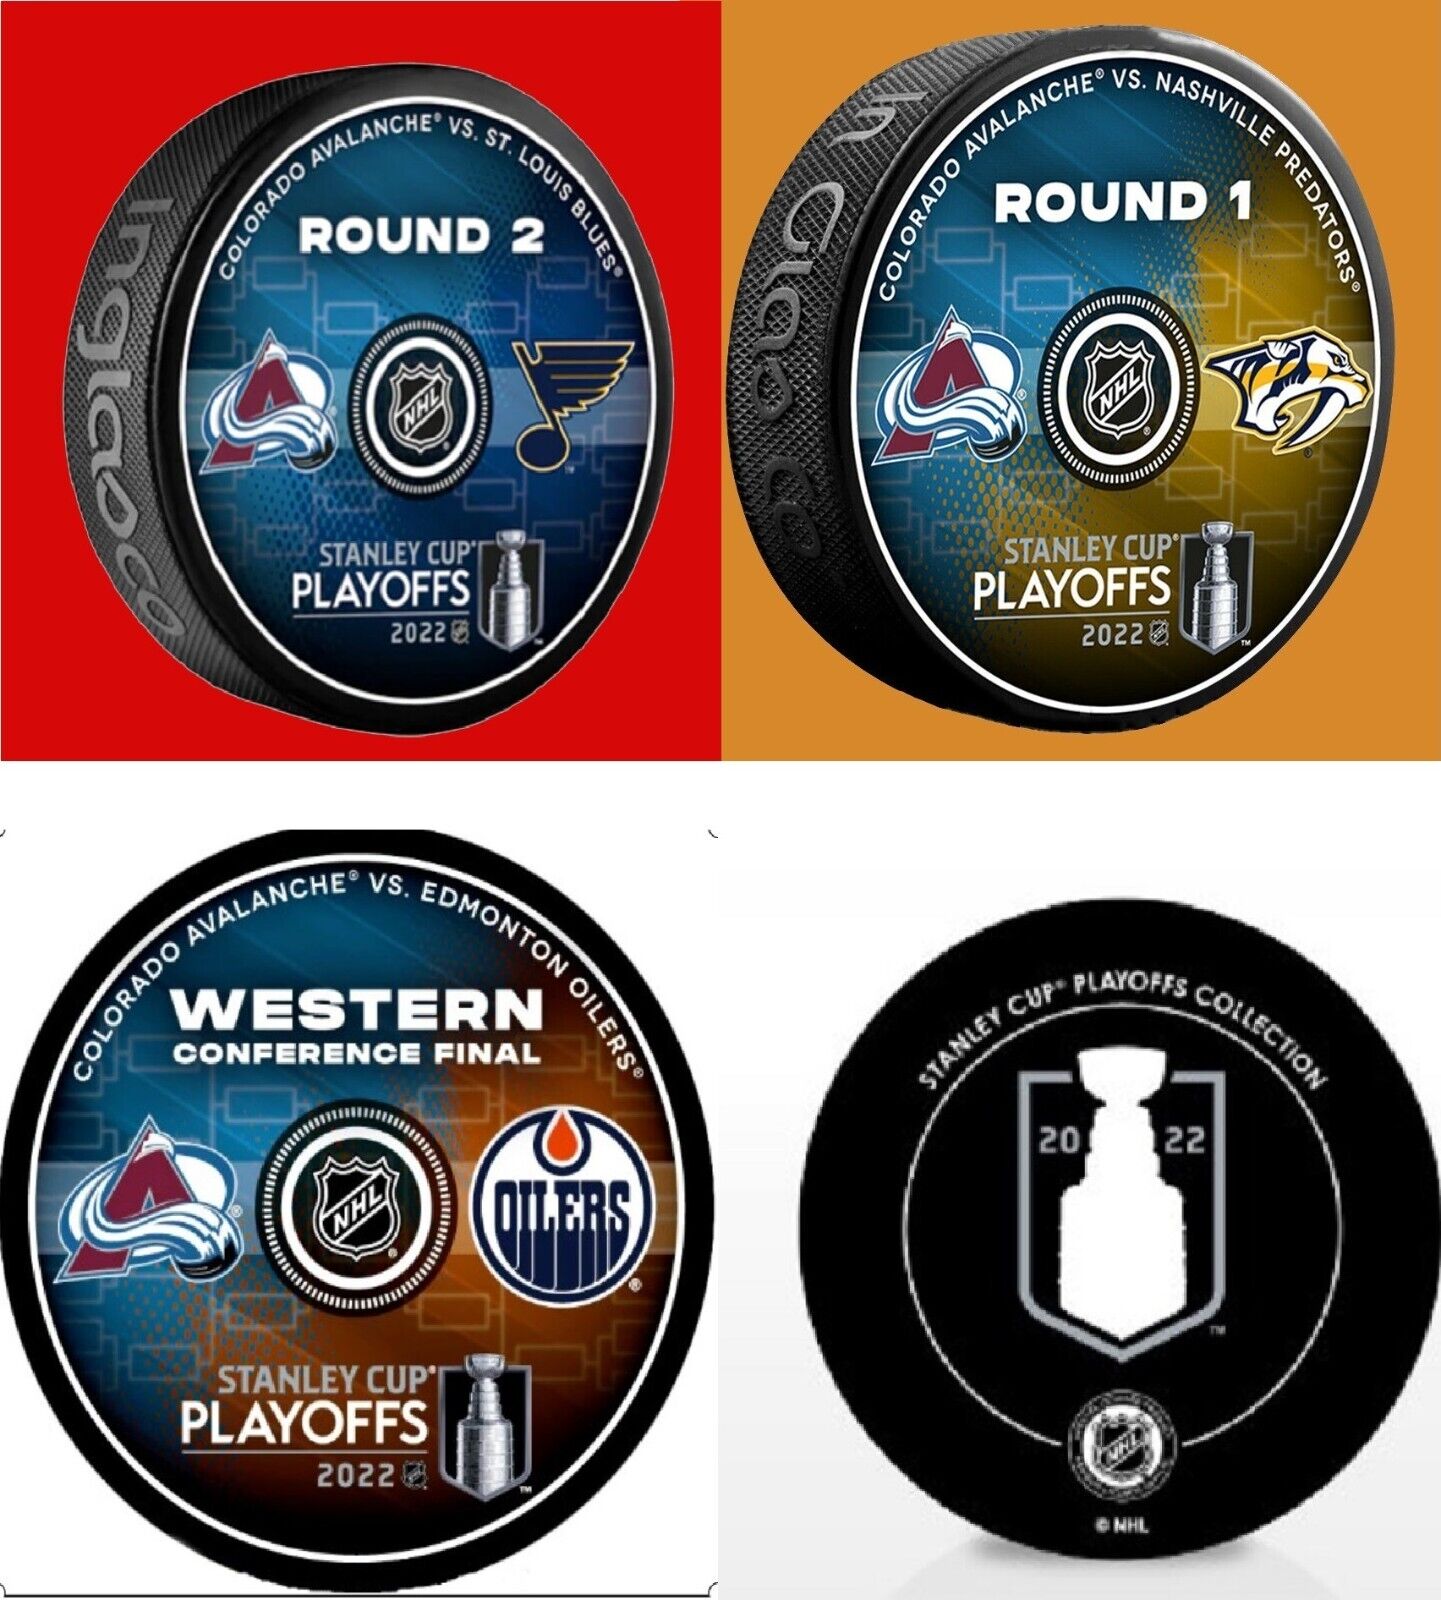 2022 NHL PLAYOFFS 3 PUCK SET COLORADO AVALANCHE WESTERN CONFERENCE ROUNDS 1 & 2 